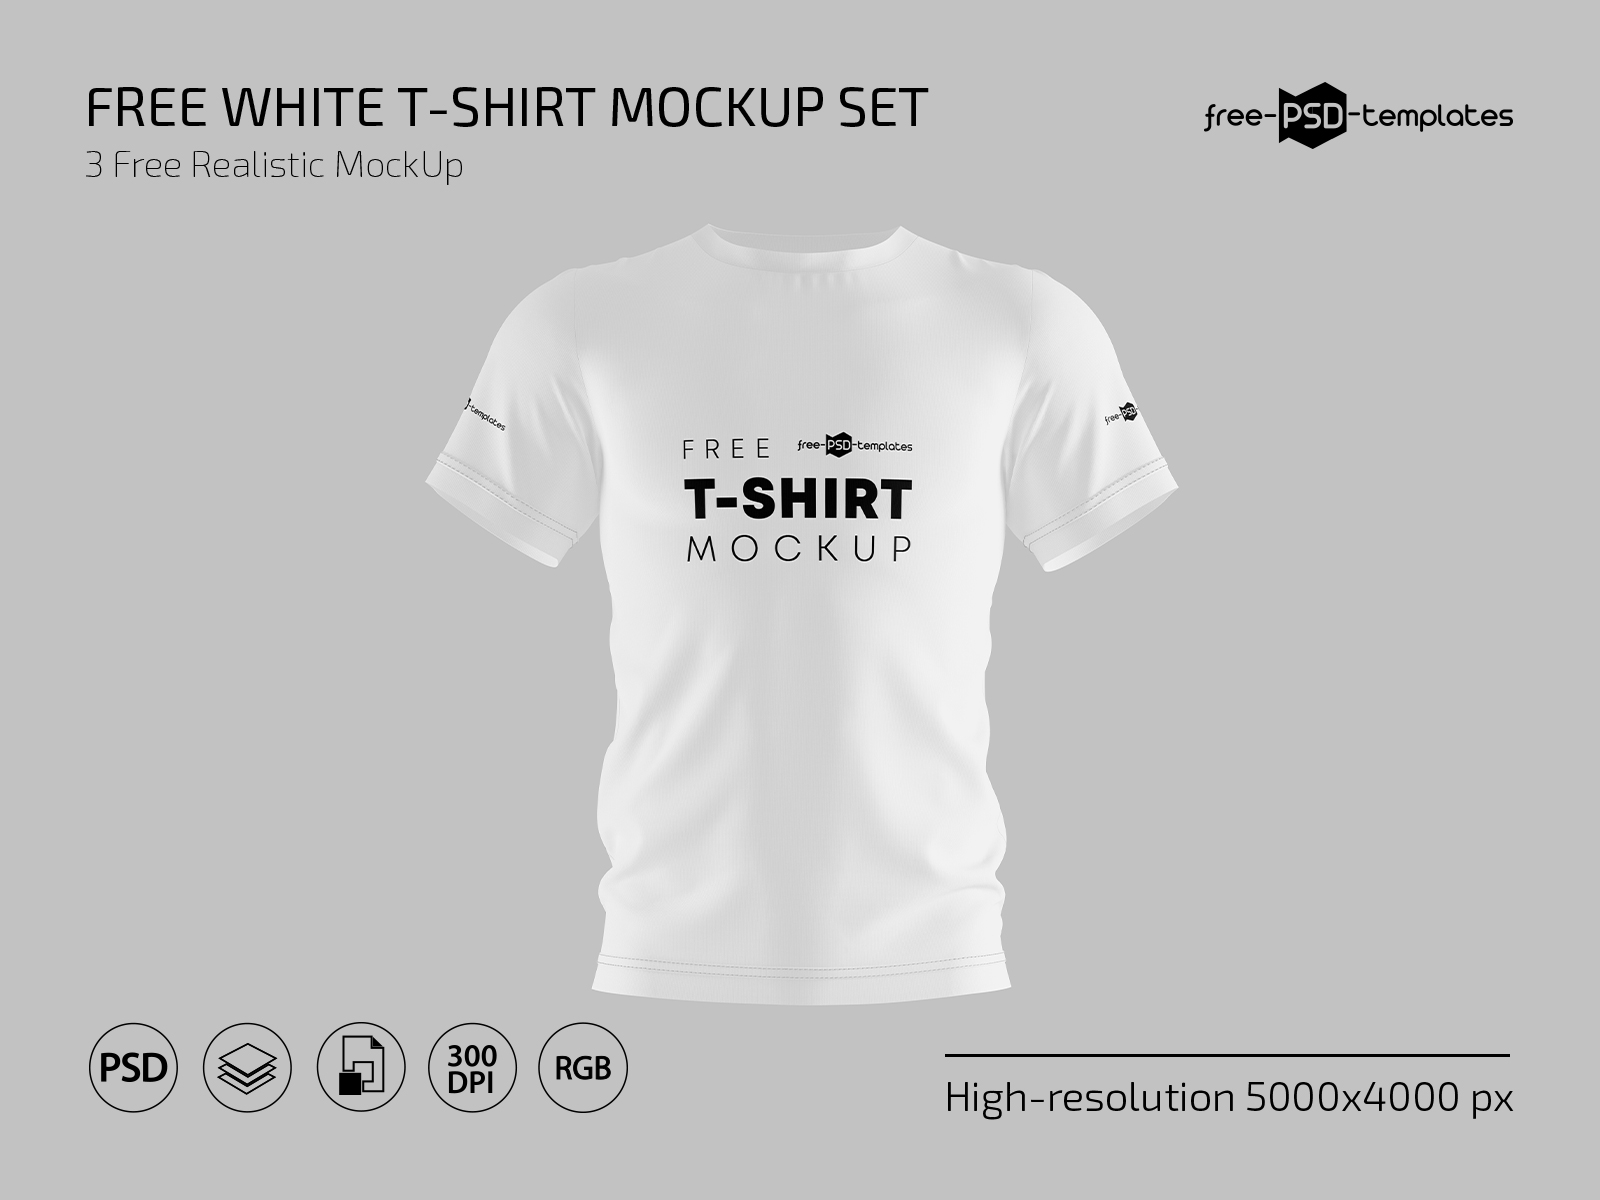 White T-Shirt Mockup by Free PSD Templates on Dribbble